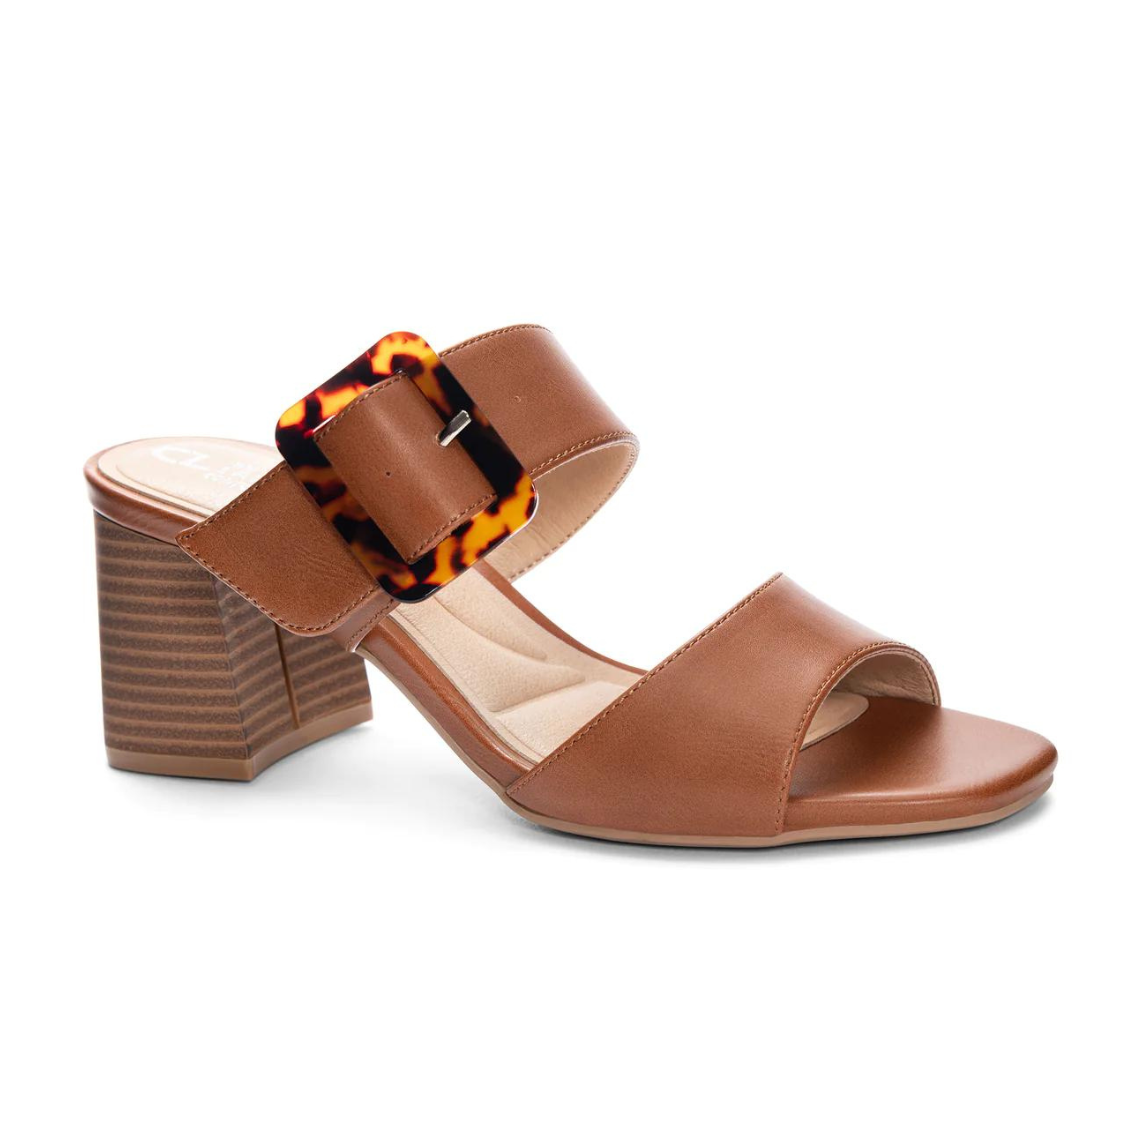 Chinese Laundry  Briana Slide Sandal- Tan. warm weather looks by pairing these women's CL by Laundry Briana tan (brown) sandals with your favourite jeans, skirts, dresses, and more. Crafted with synthetic upper, these two banded sandals have a round open toe, oversized buckle detail at the instep band for a unique look, synthetic lining and padded synthetic sockliner for comfort The durable TPR outsole with stacked block heel heightens the appeal.